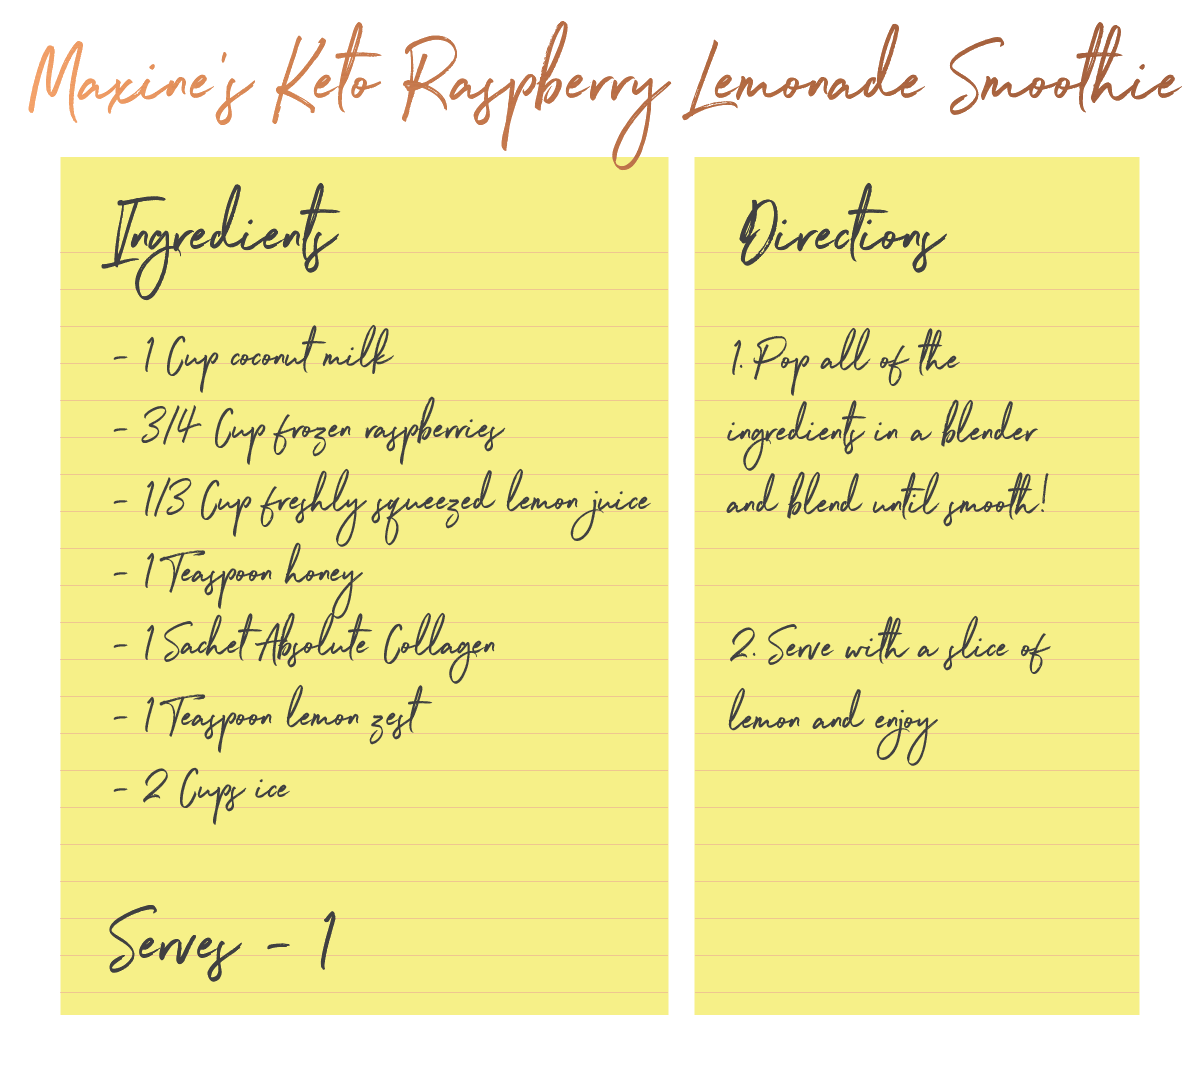 Image with cursive text on a yellow background showing a recipe for a keto raspberry lemonade collagen smoothie